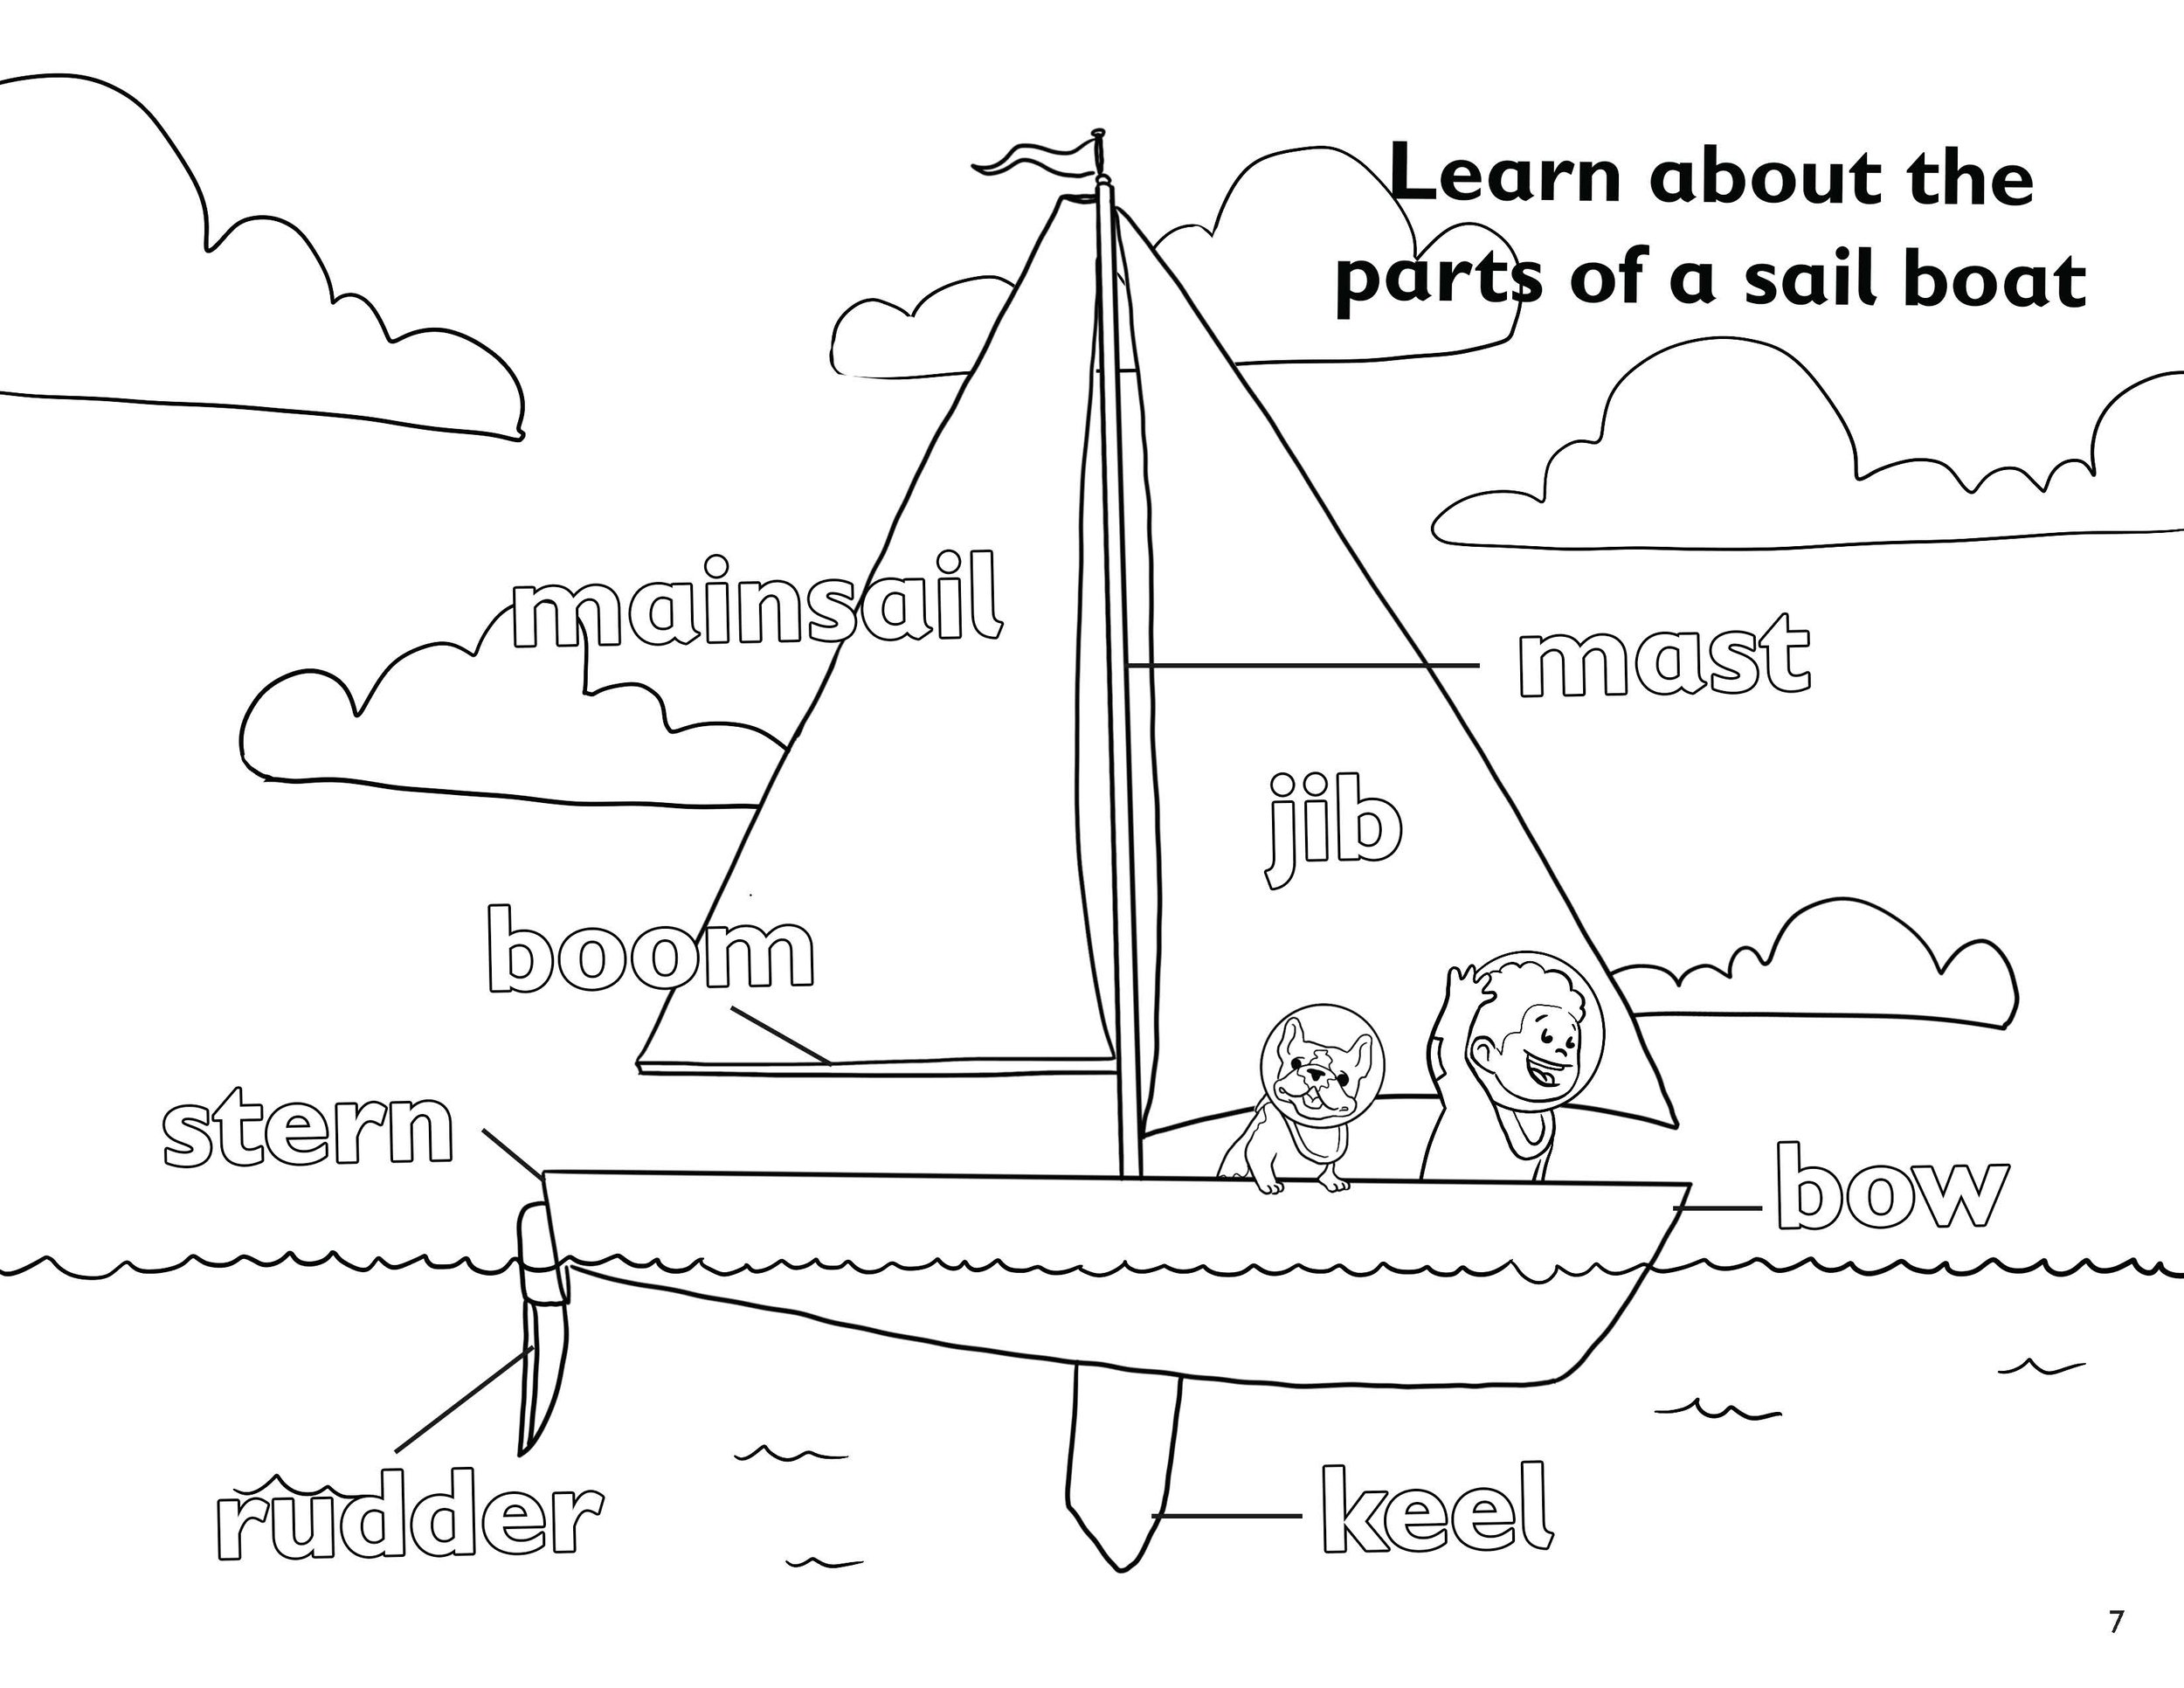 7-14Goes to Sea Coloring book_Page_07.jpg